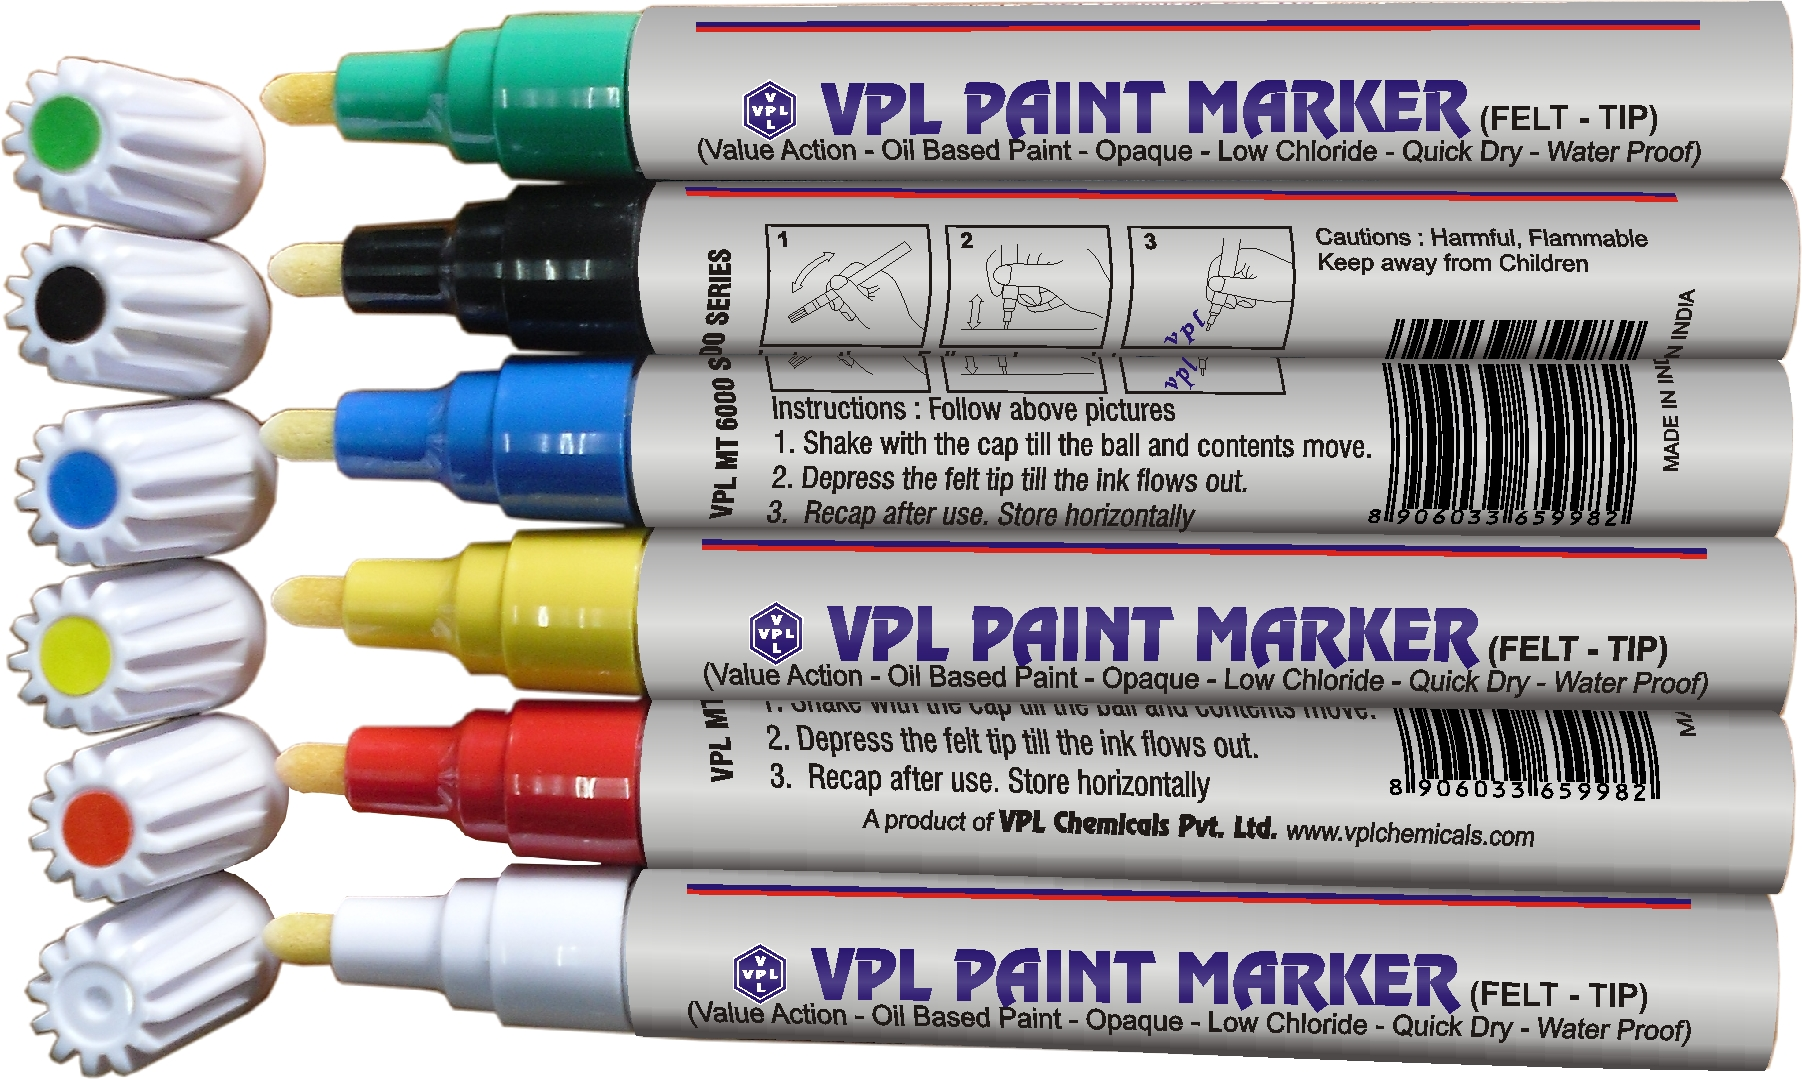 Exploring VPL Industrial Technologies' Low Chloride Paint Markers and Thermomelt Heat Sticks: vplitpl — LiveJournal